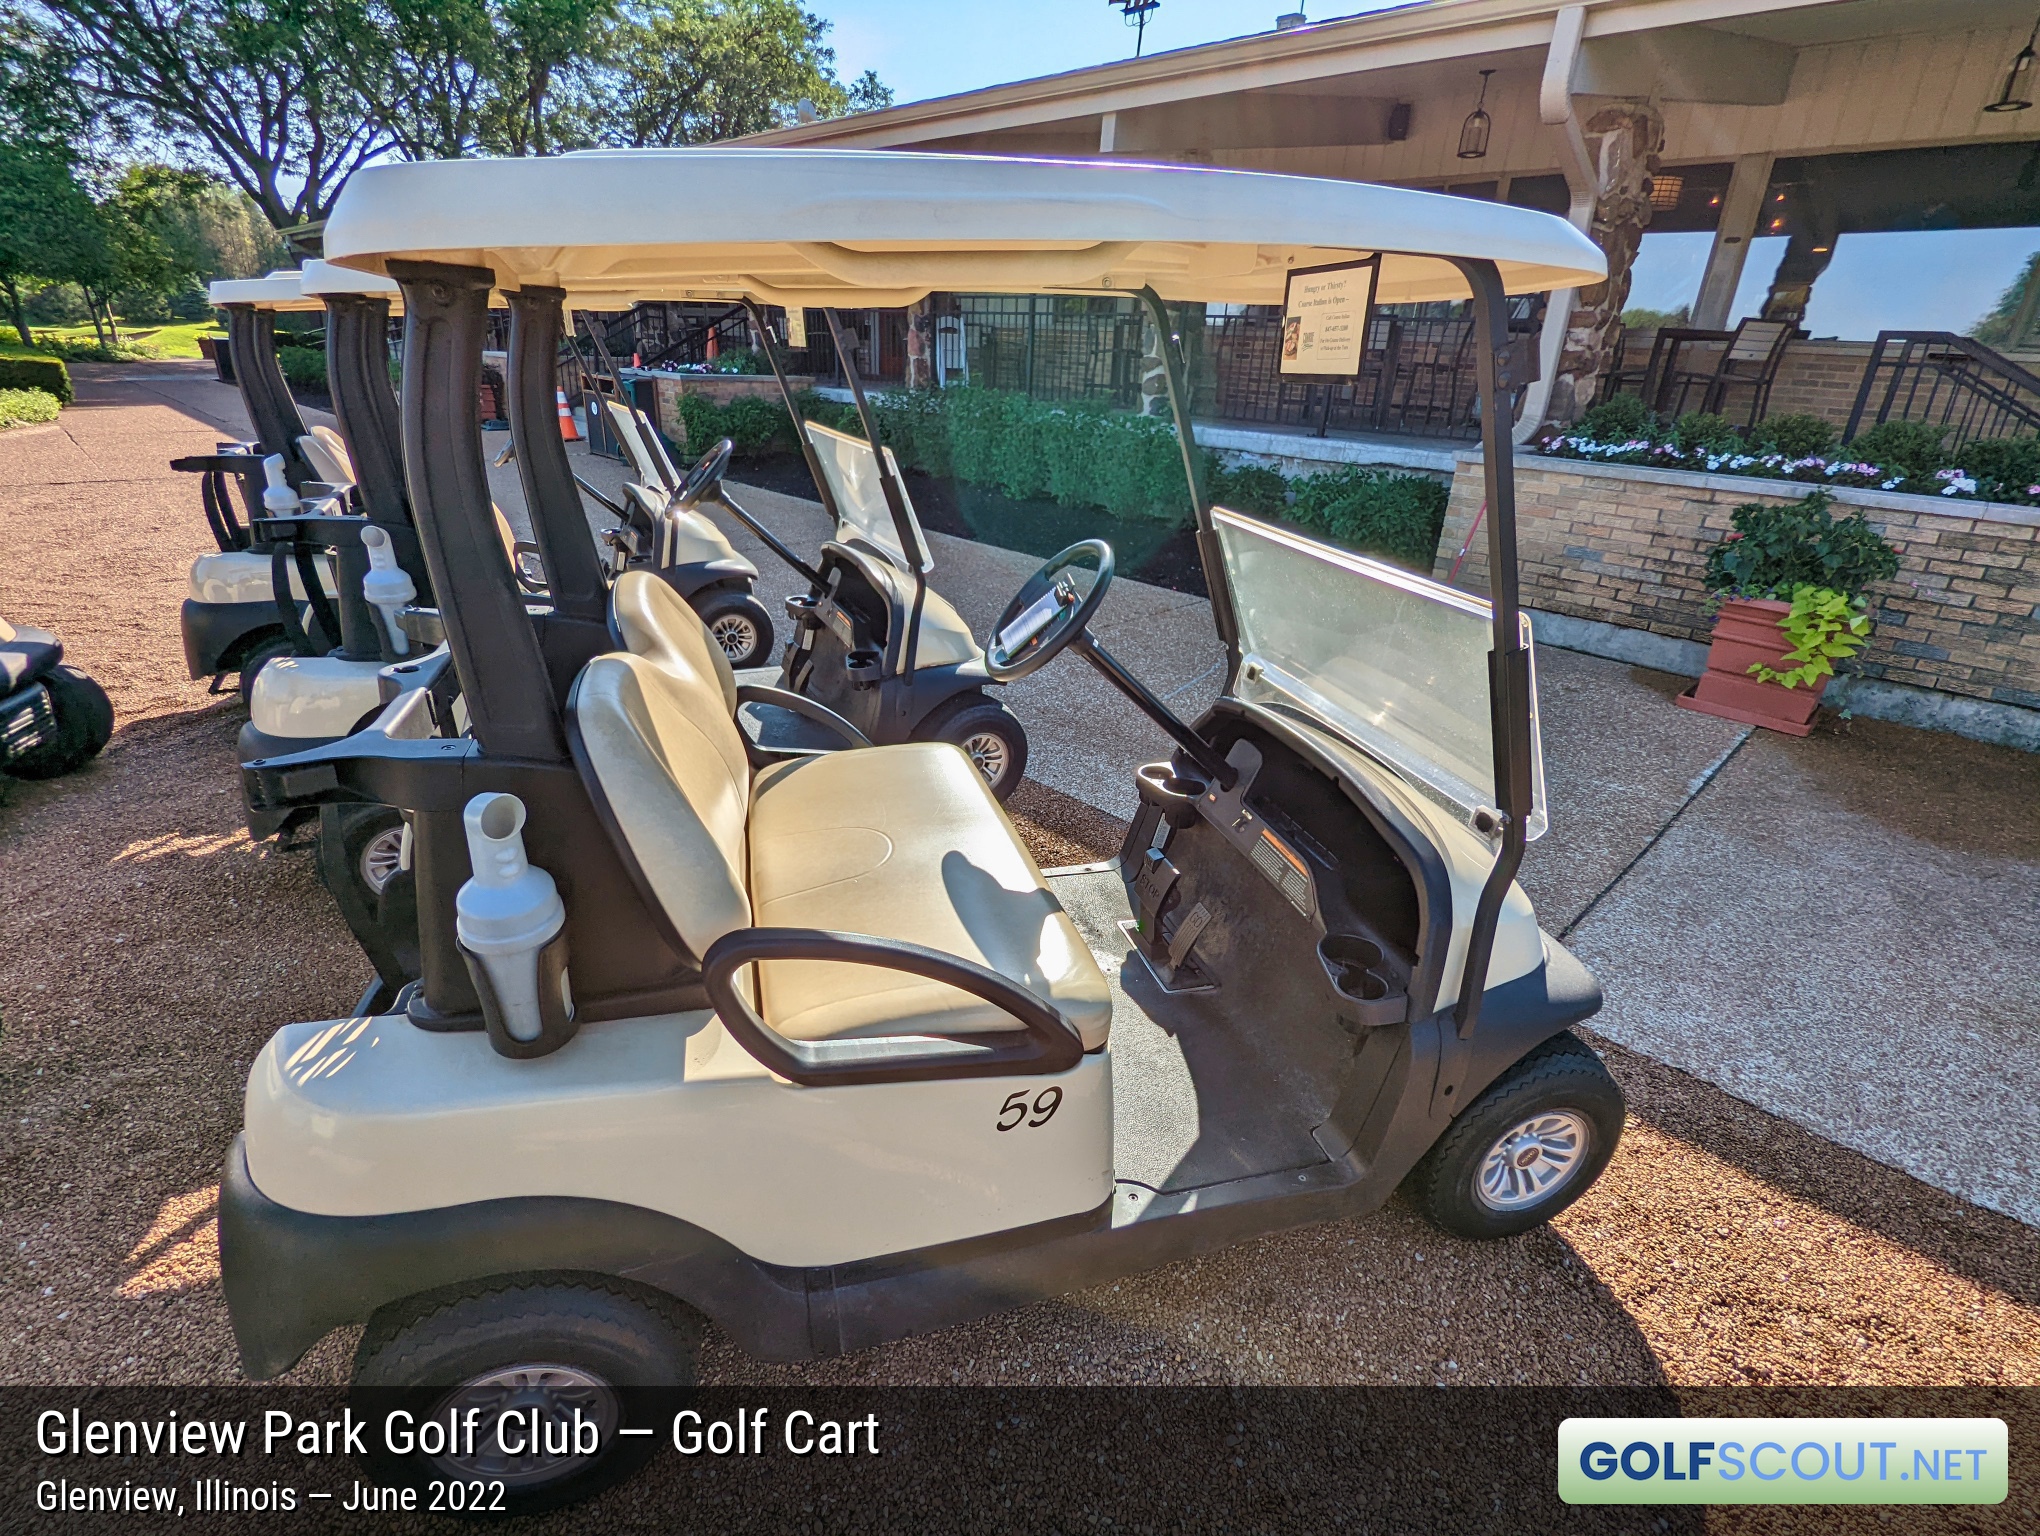 Photo of the golf carts at Glenview Park Golf Club in Glenview, Illinois. 